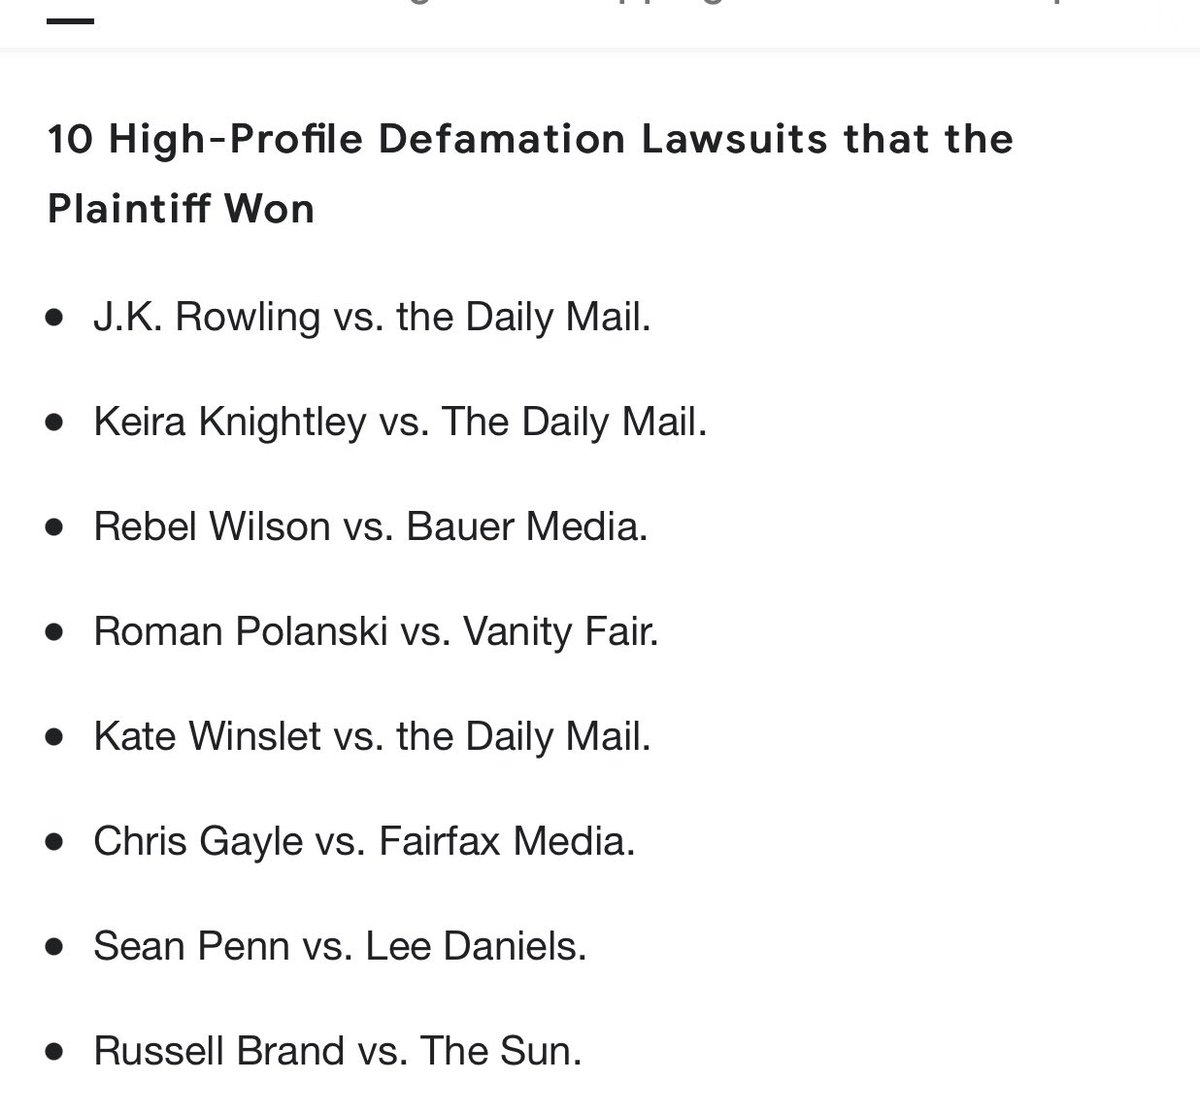 @CamillaTominey What about the other people suing?  Elton John and Hugh Grant?  Are they struggling with their fame too?  
What about Kate Winslet and Kiera Knightly?  They won lawsuits against the Daily Mail. Were they hysterical women too?  
Are they ALL paranoid?  I find that hard to believe